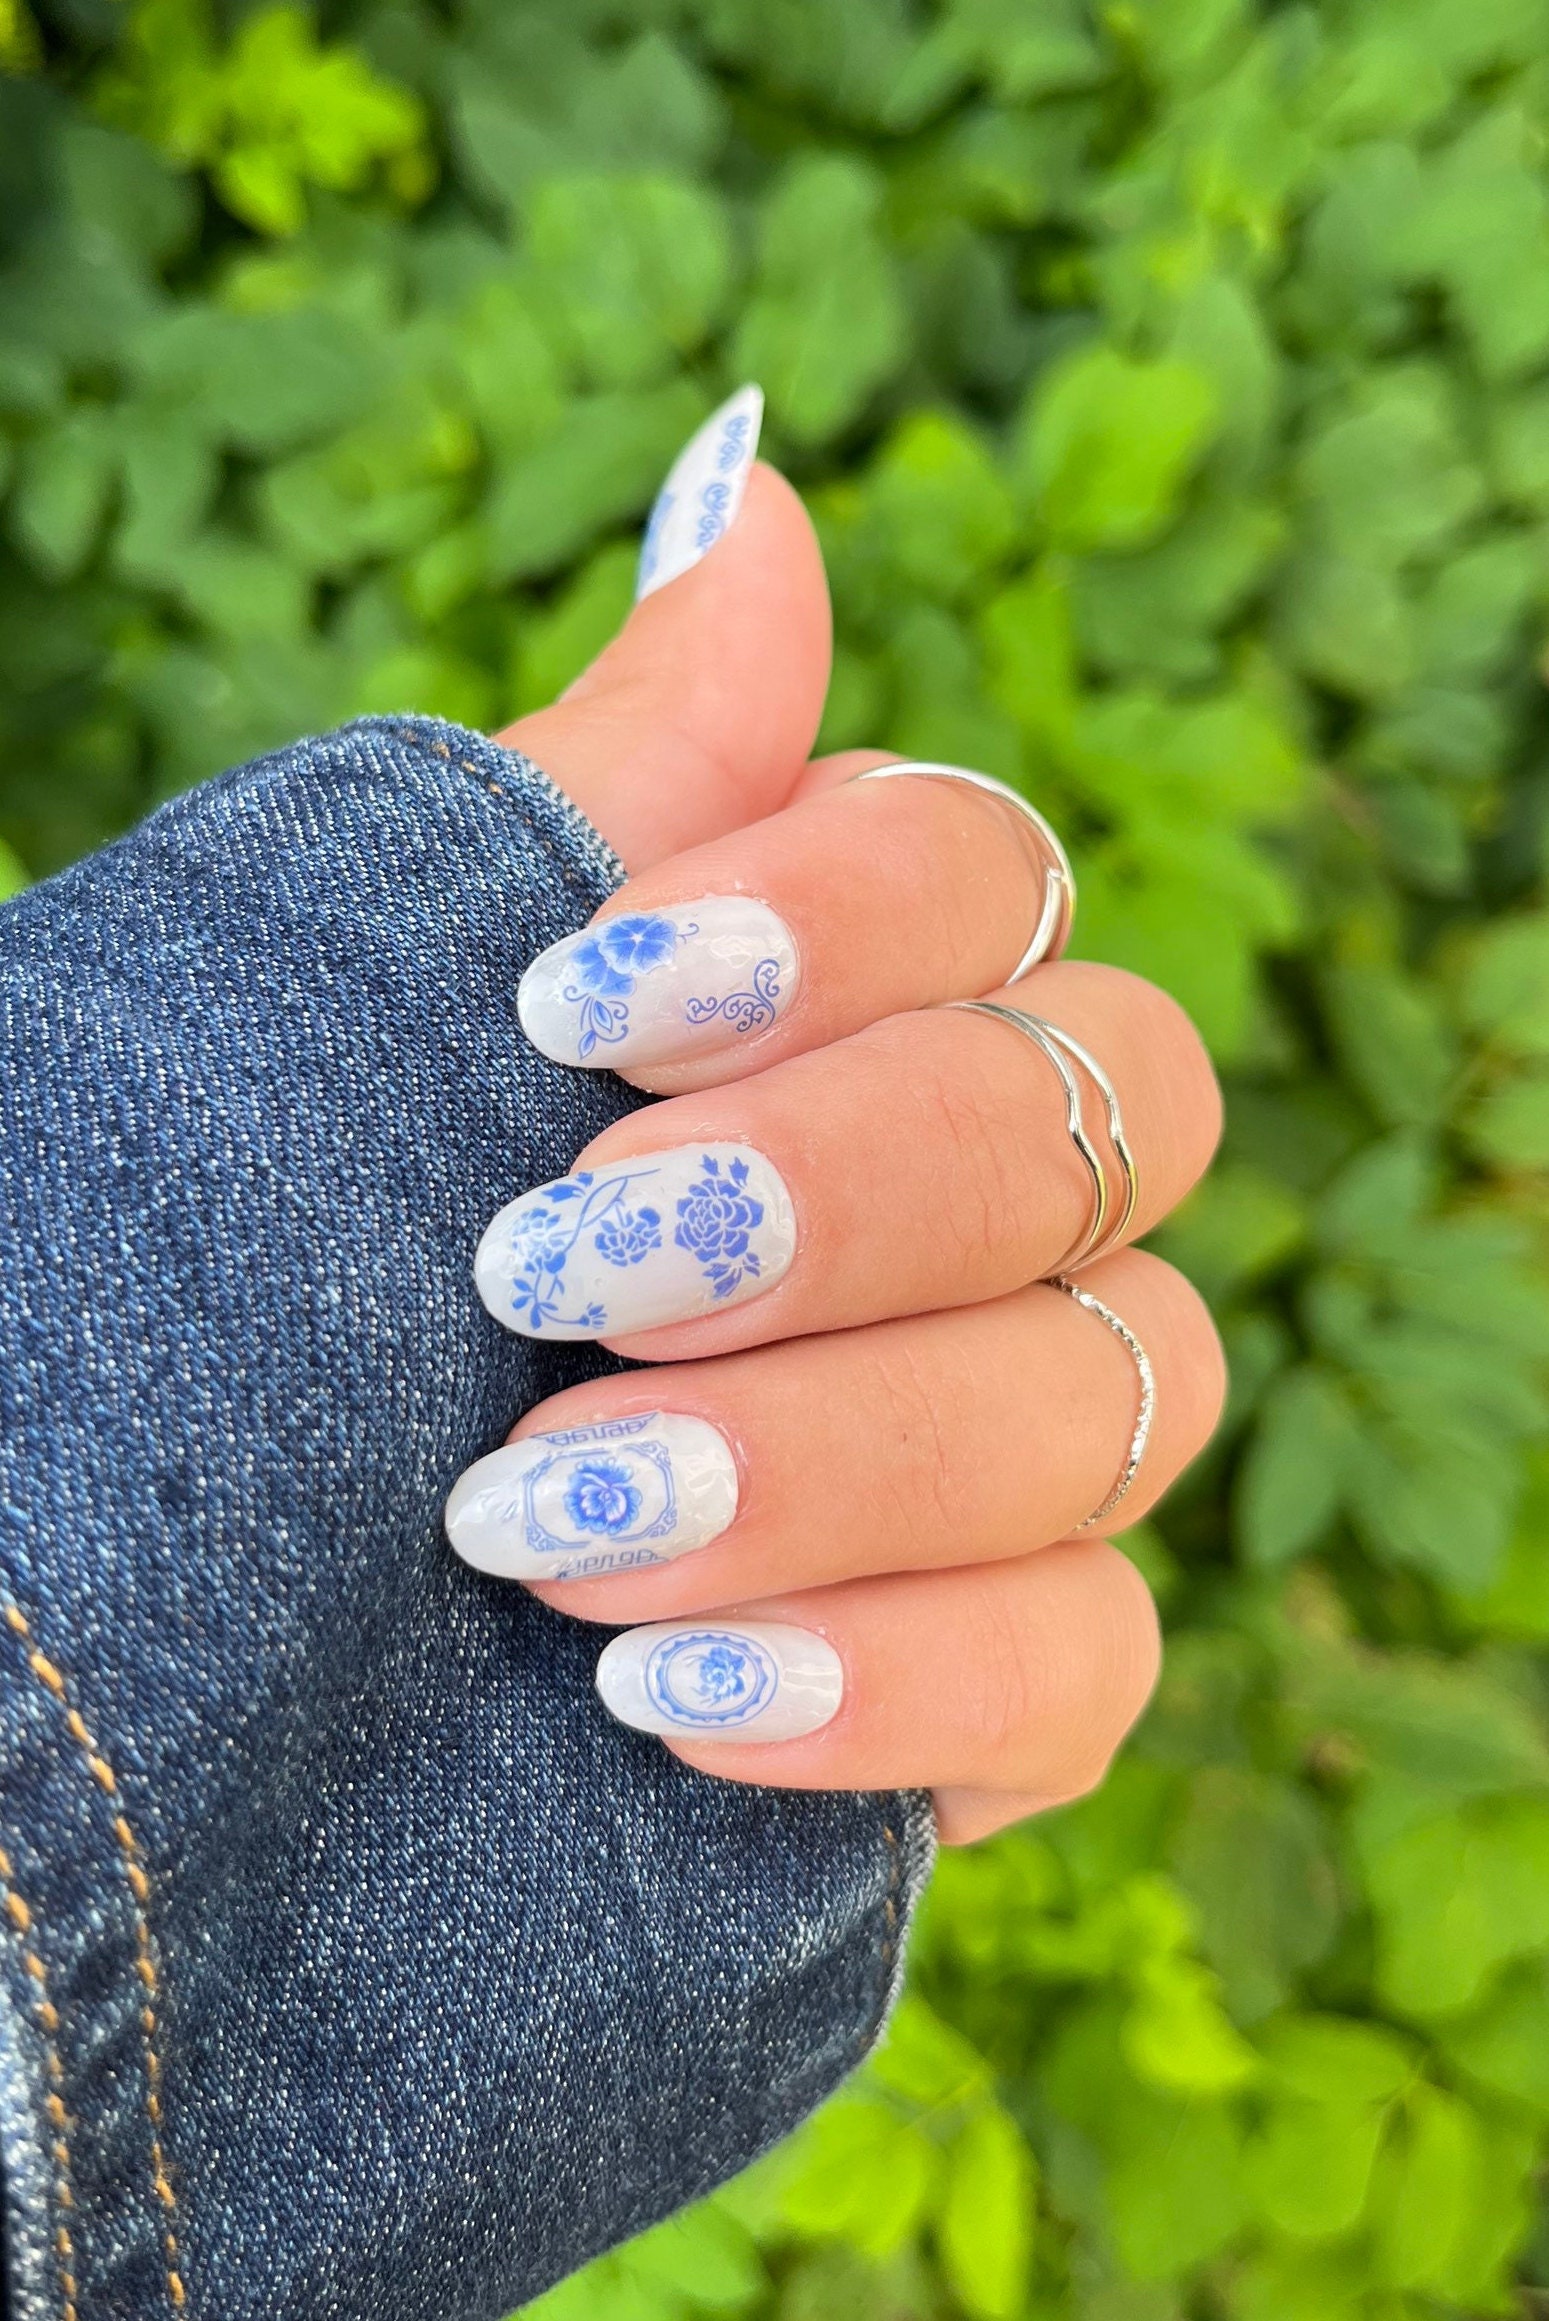 Manicure Monday with Claire's Press On Nails! - Fancieland